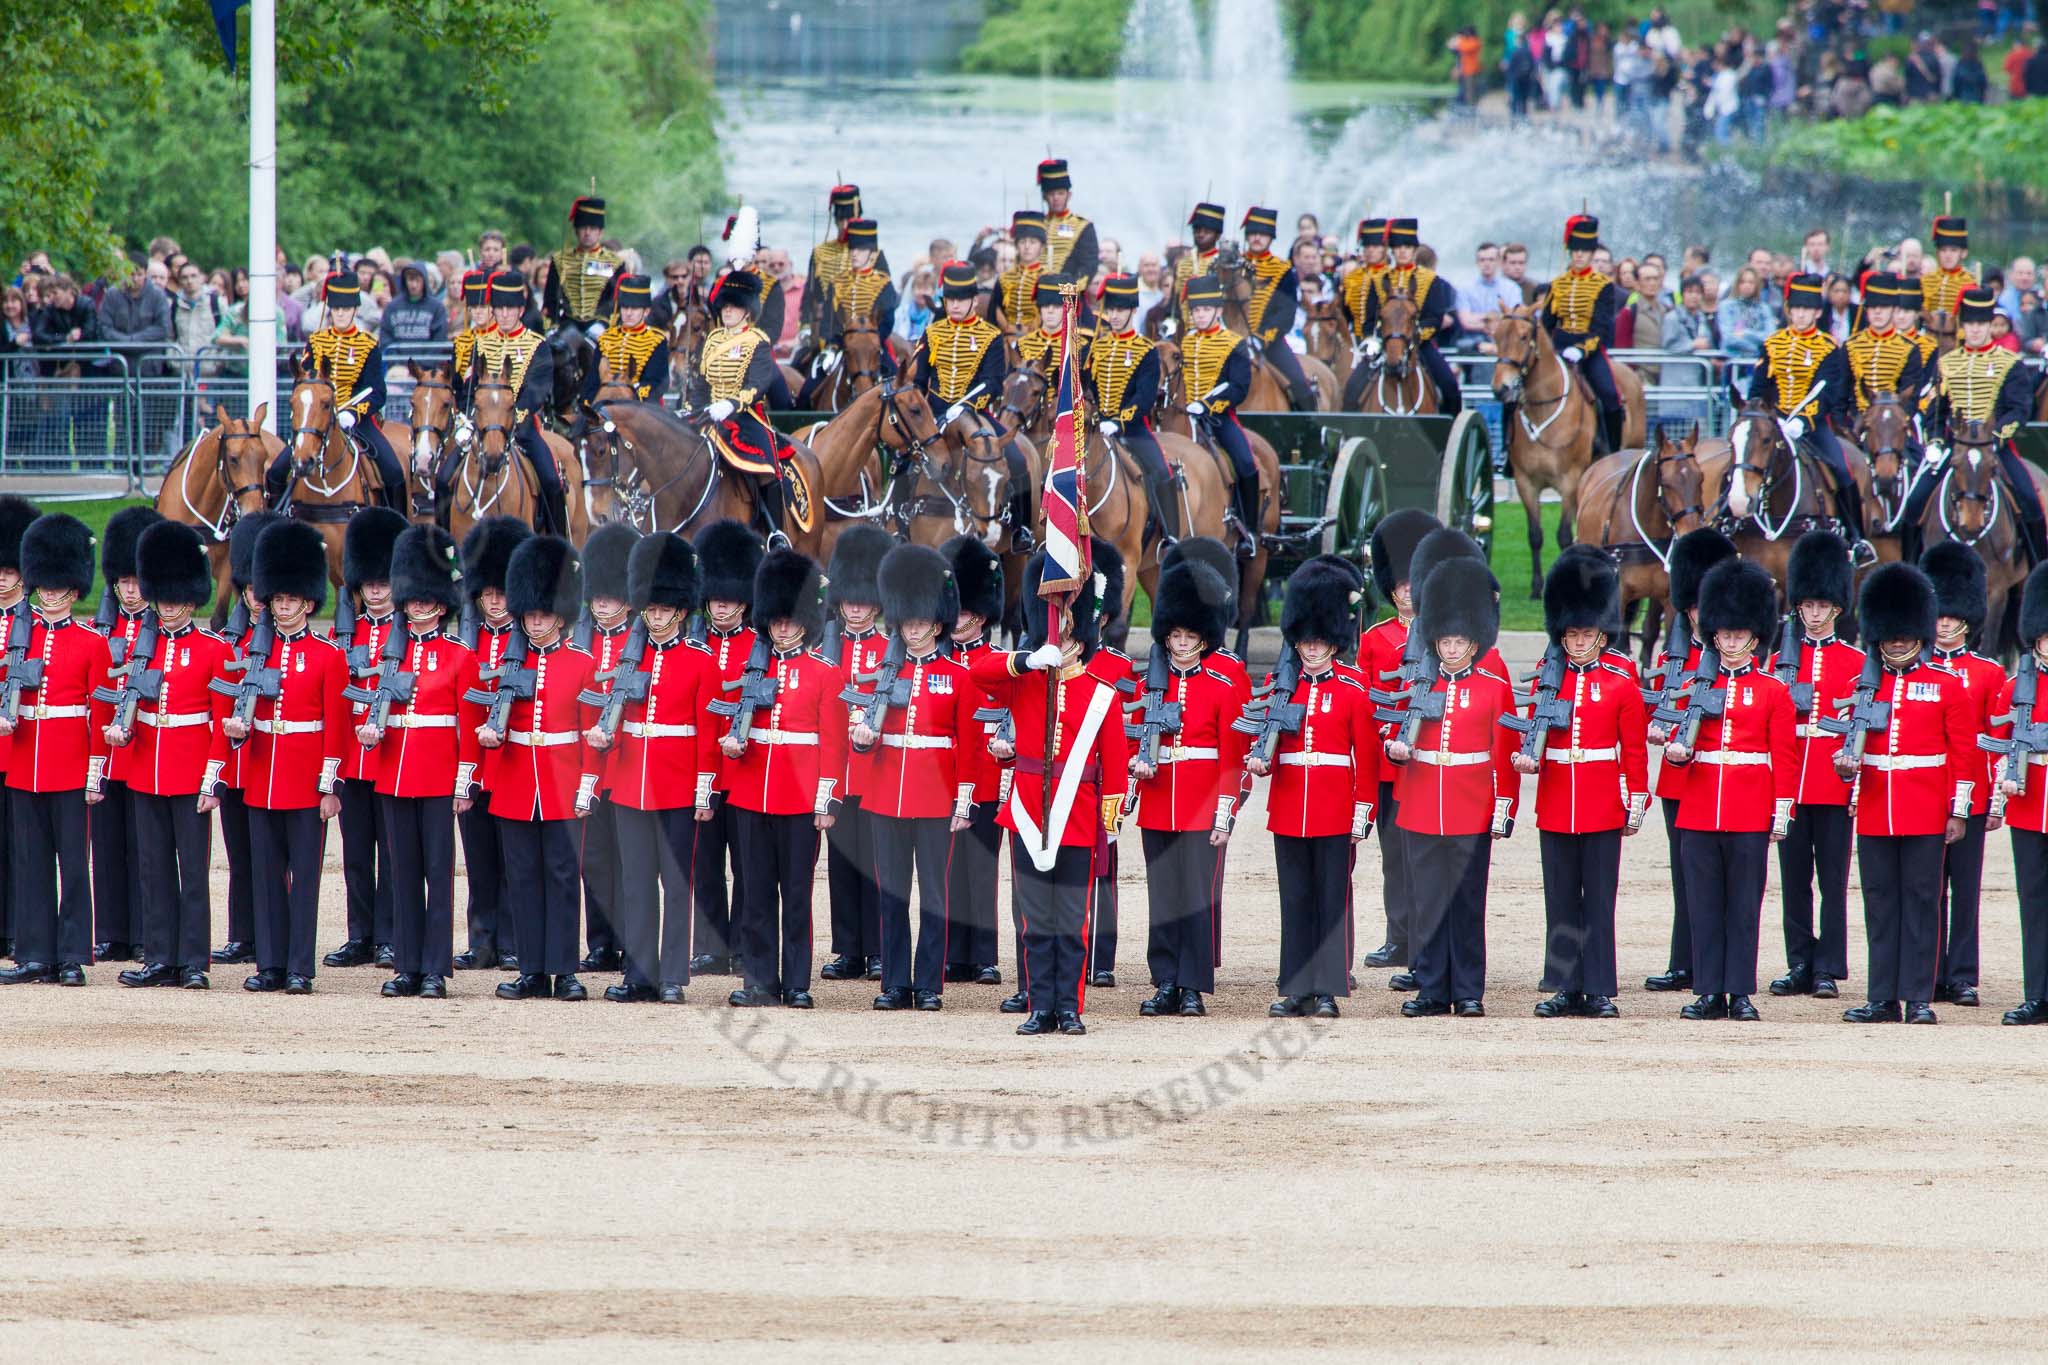 Major General's Review 2013: The Ensign, Second Lieutenant Joel Dinwiddle, and the Escort to the Colour,are back at their initial position, when they were the Escort for the Colour..
Horse Guards Parade, Westminster,
London SW1,

United Kingdom,
on 01 June 2013 at 11:26, image #444